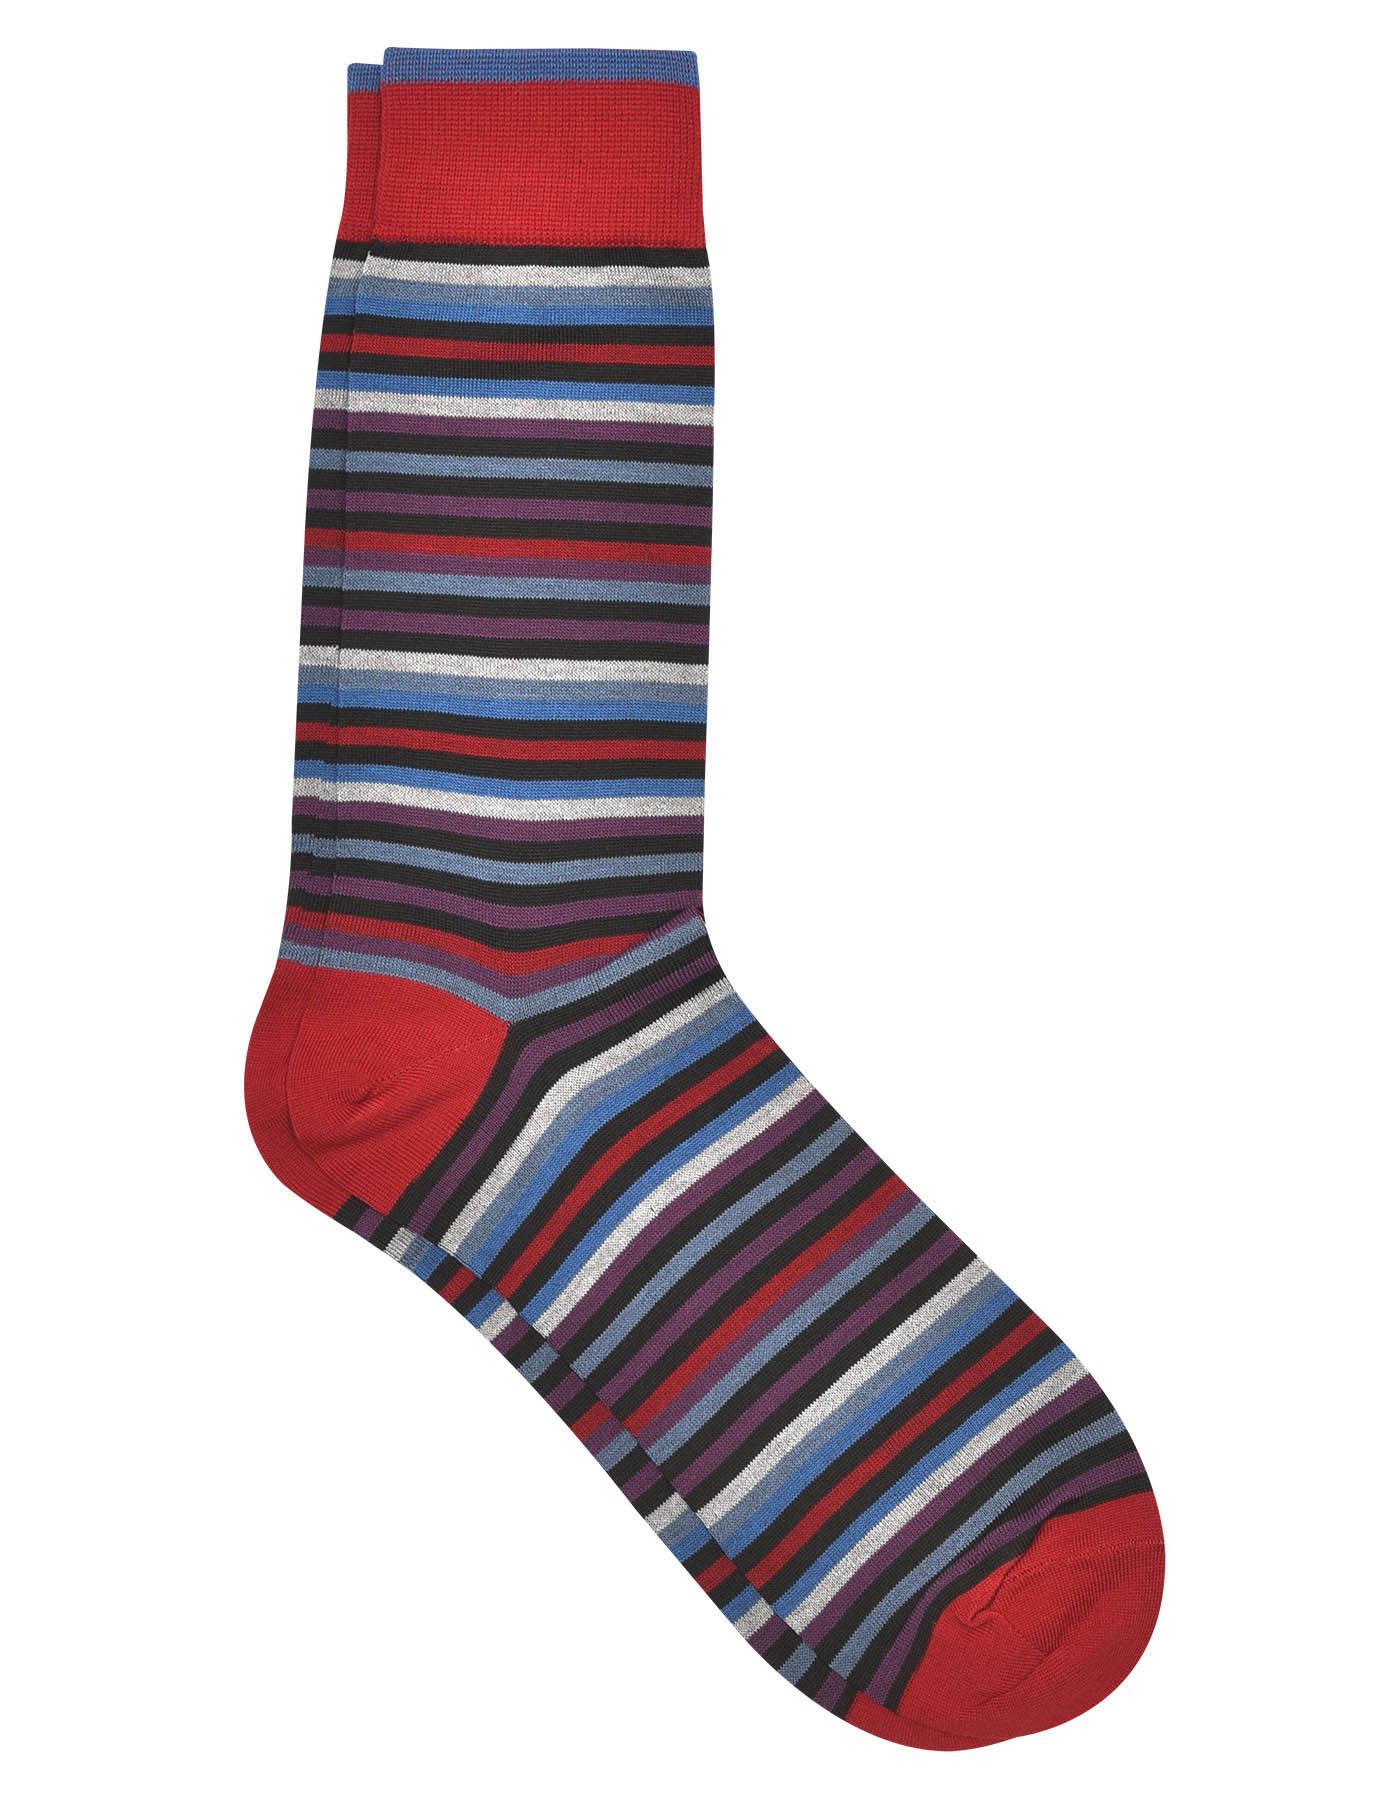 Buy Red and black Stripe Sock Online Shopping in Pakistan | Uniworth